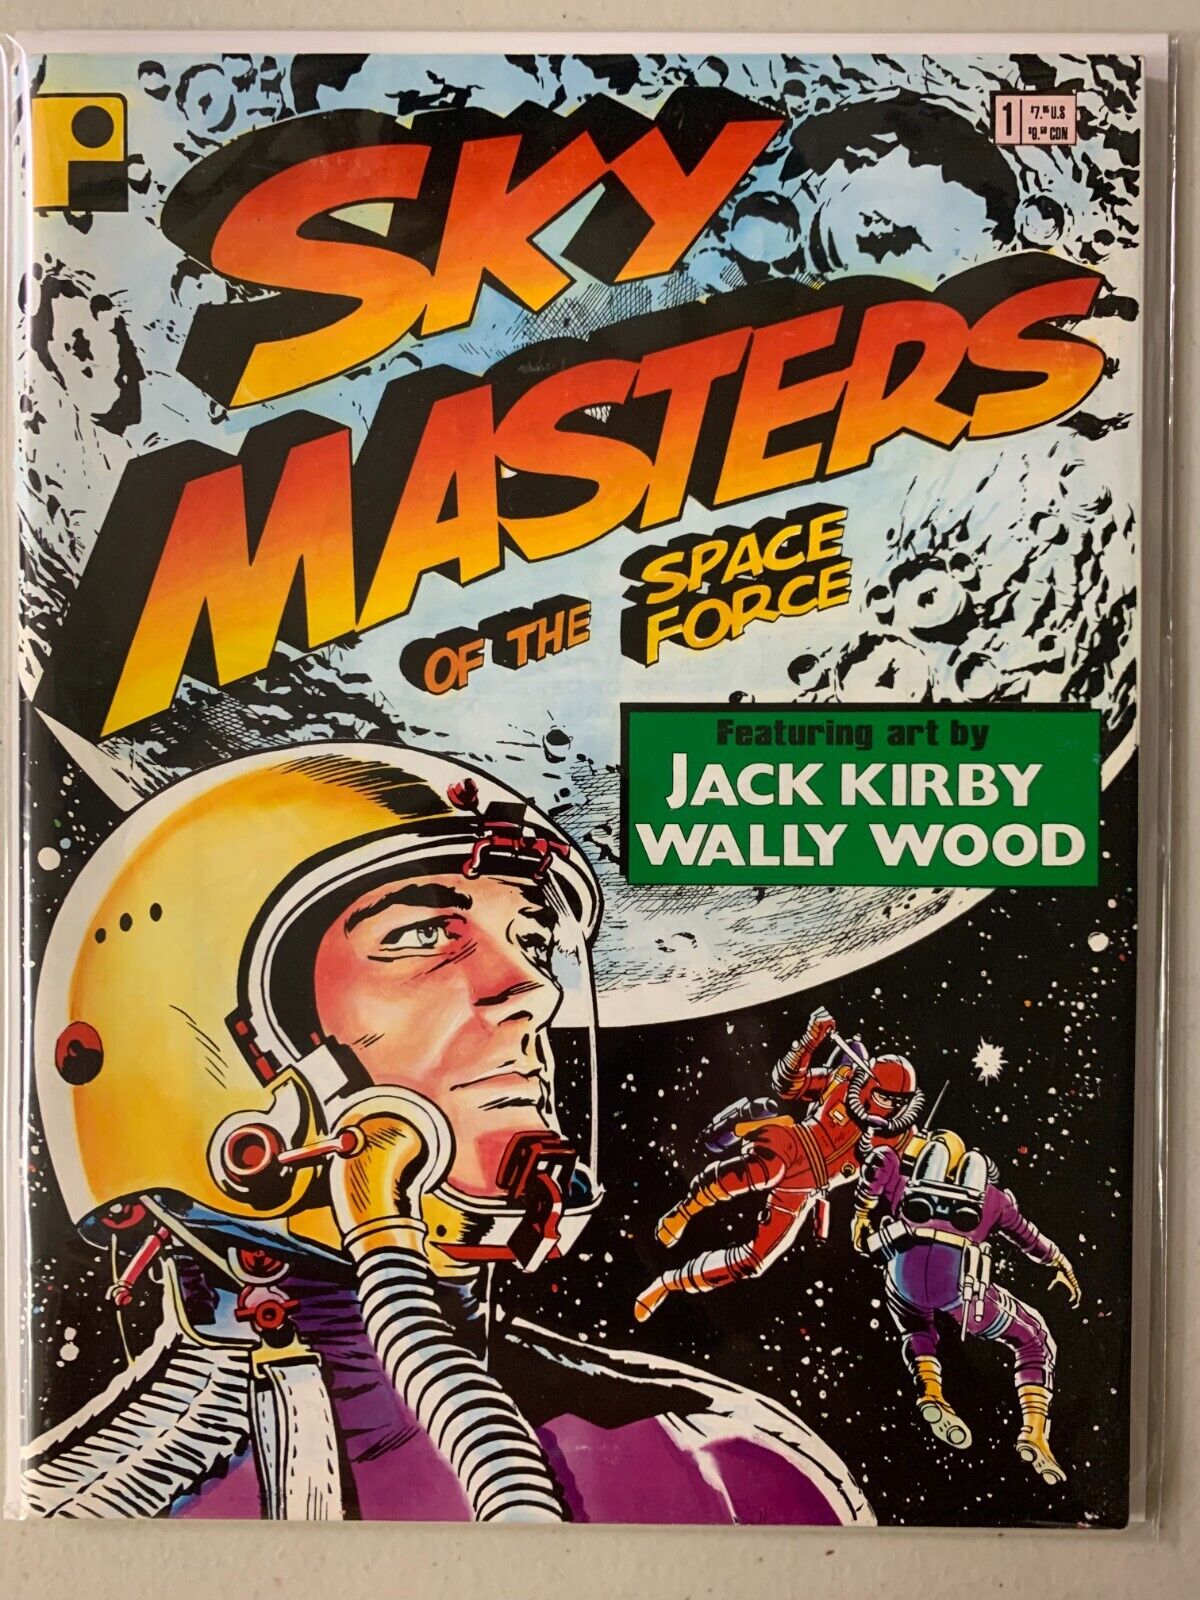 Sky Masters of the Space Force #1 4.0 (1991)